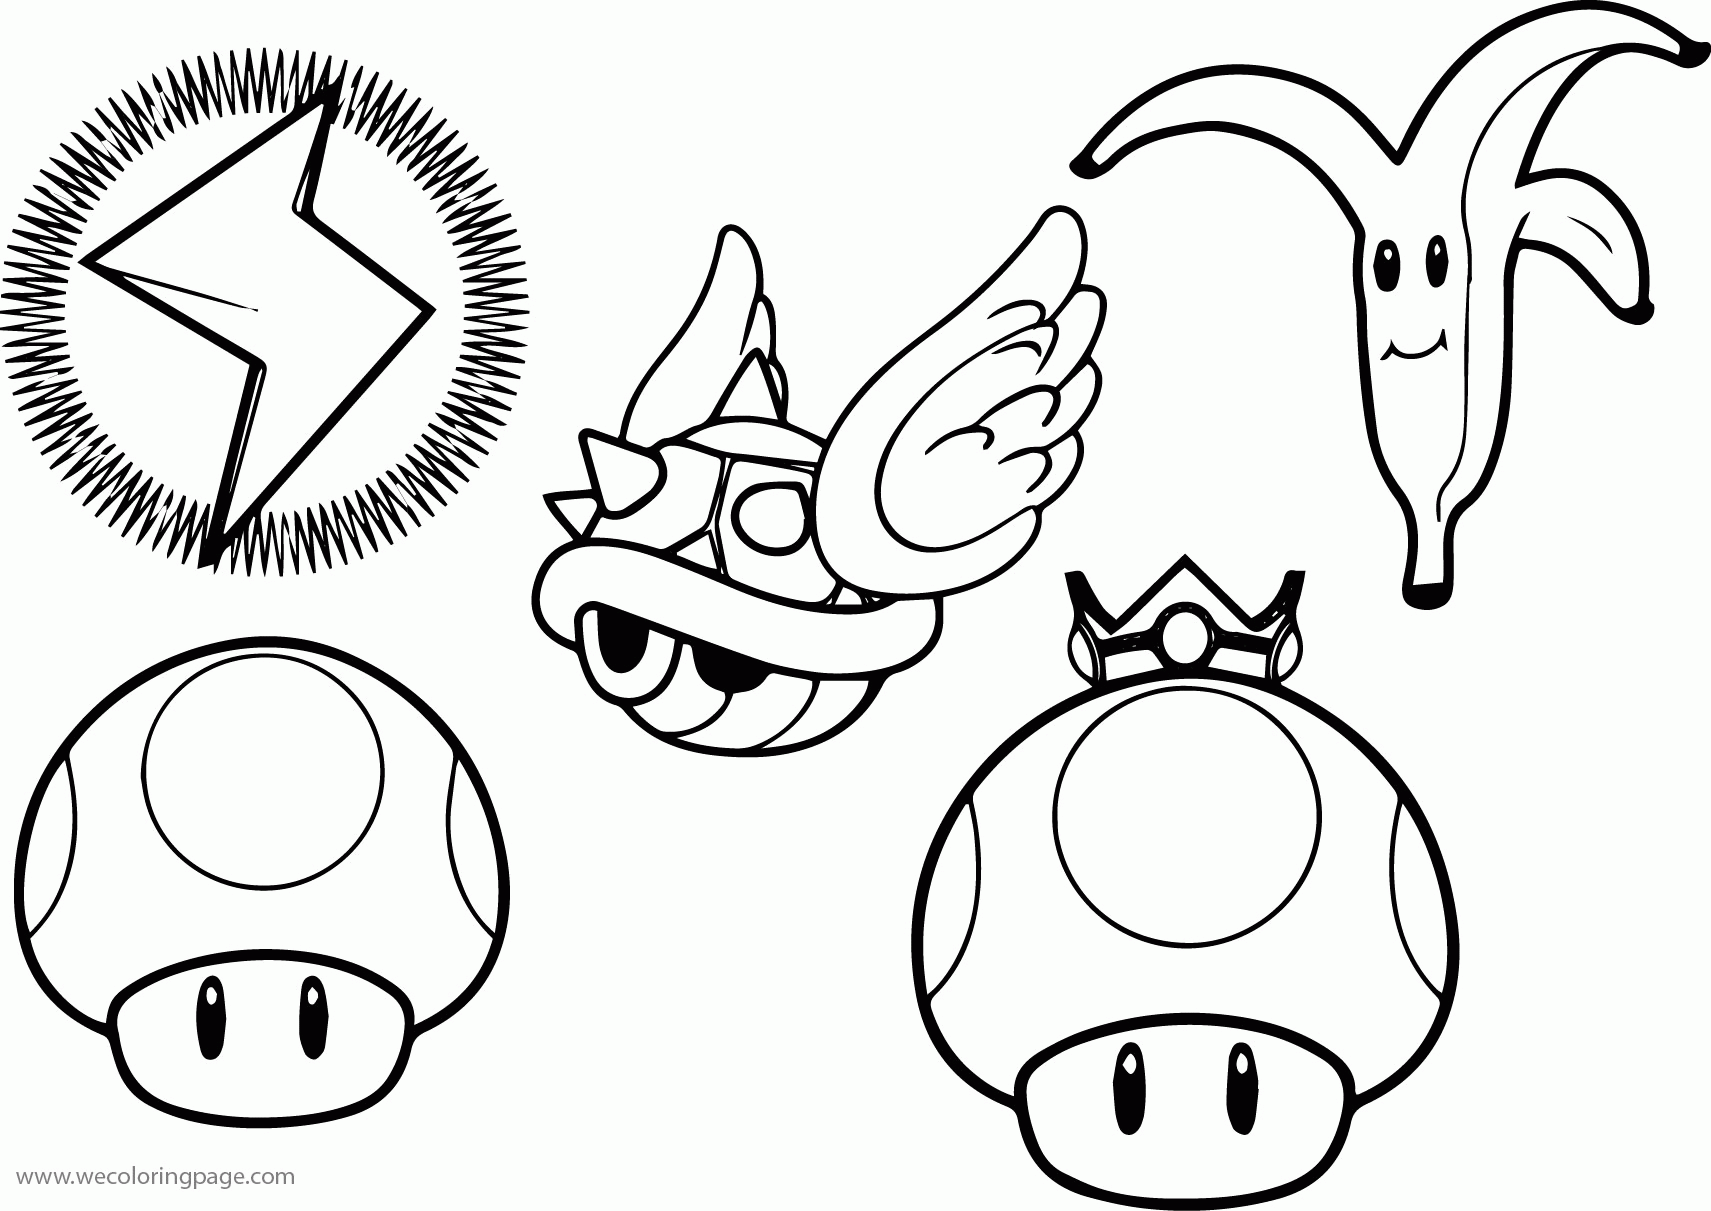 mario characters coloring pages free printable mario brothers coloring pages for kids mario coloring characters pages 